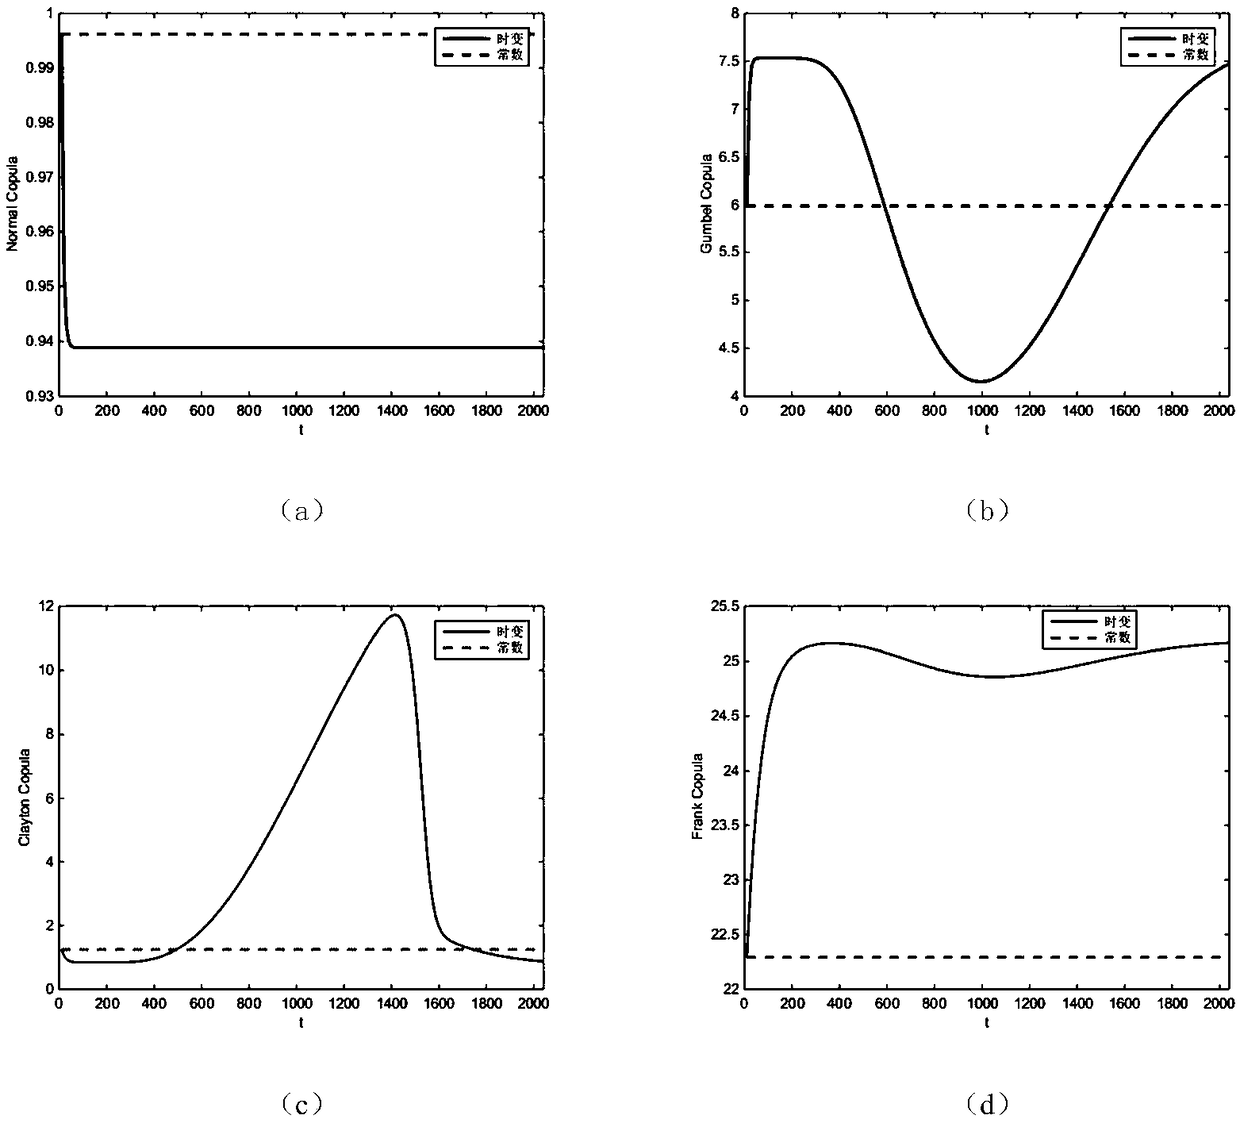 Reliability model of competitive failure systems with multiple degradation processes and stochastic shocks